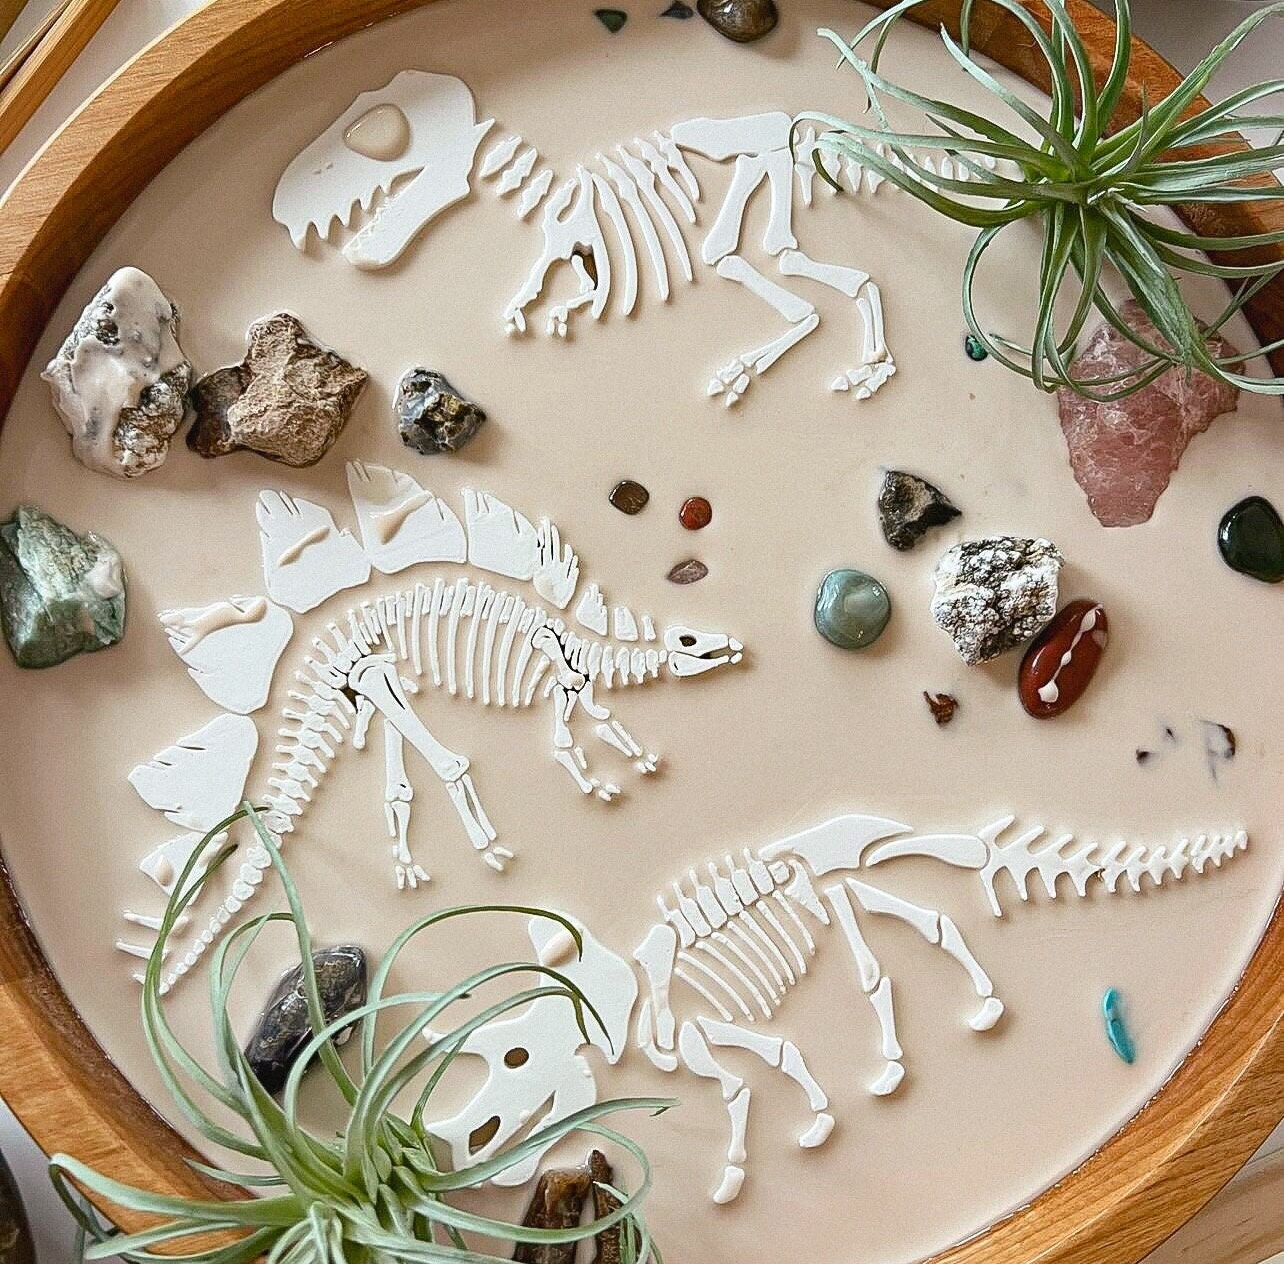 Prehistoric Fossils for Sensory Play Oobleck Muddy Play